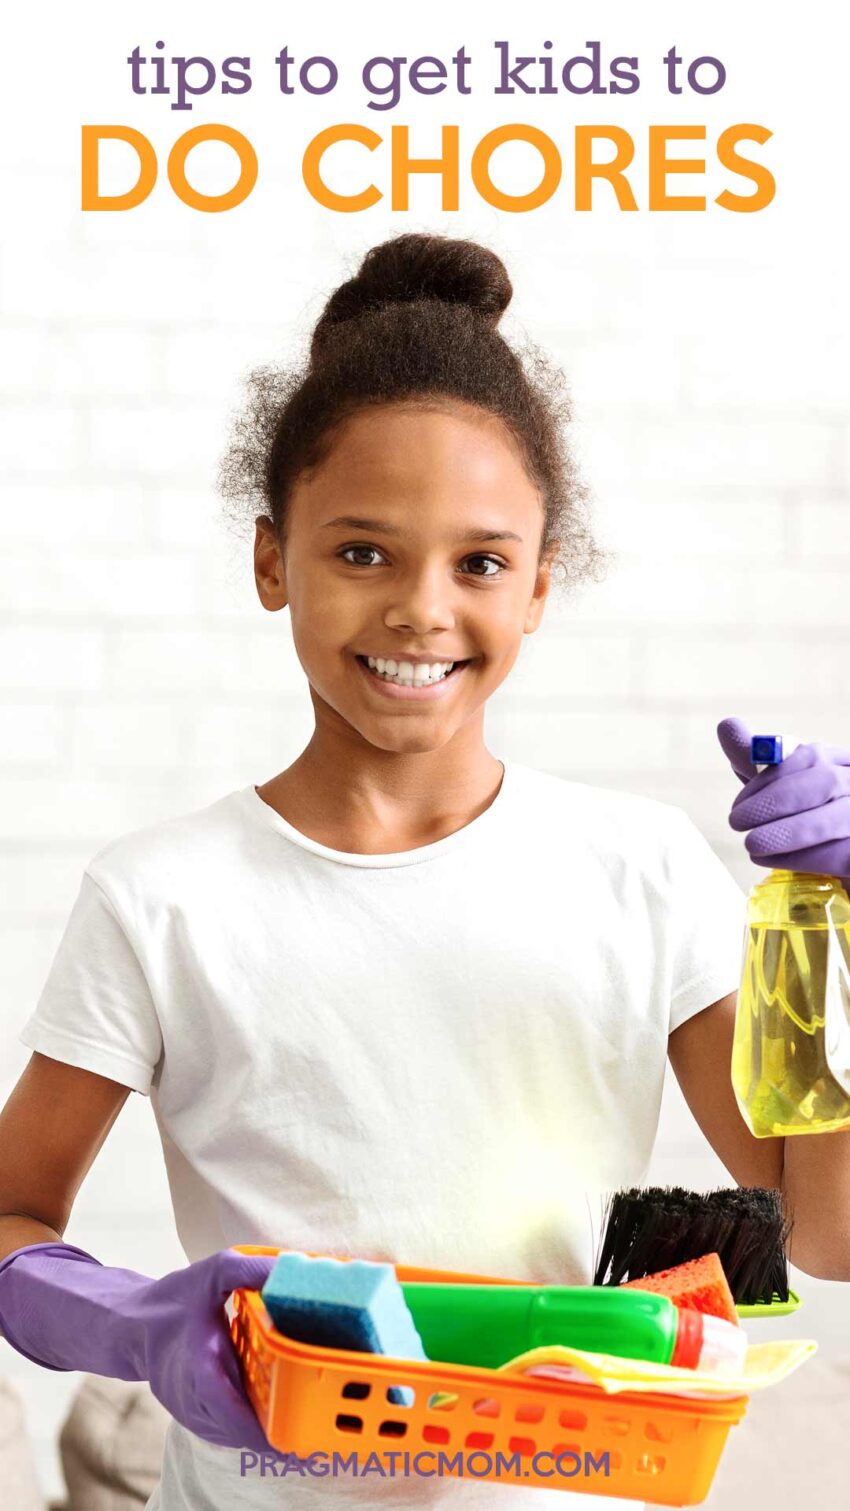 Tips to Get Kids to Do Chores